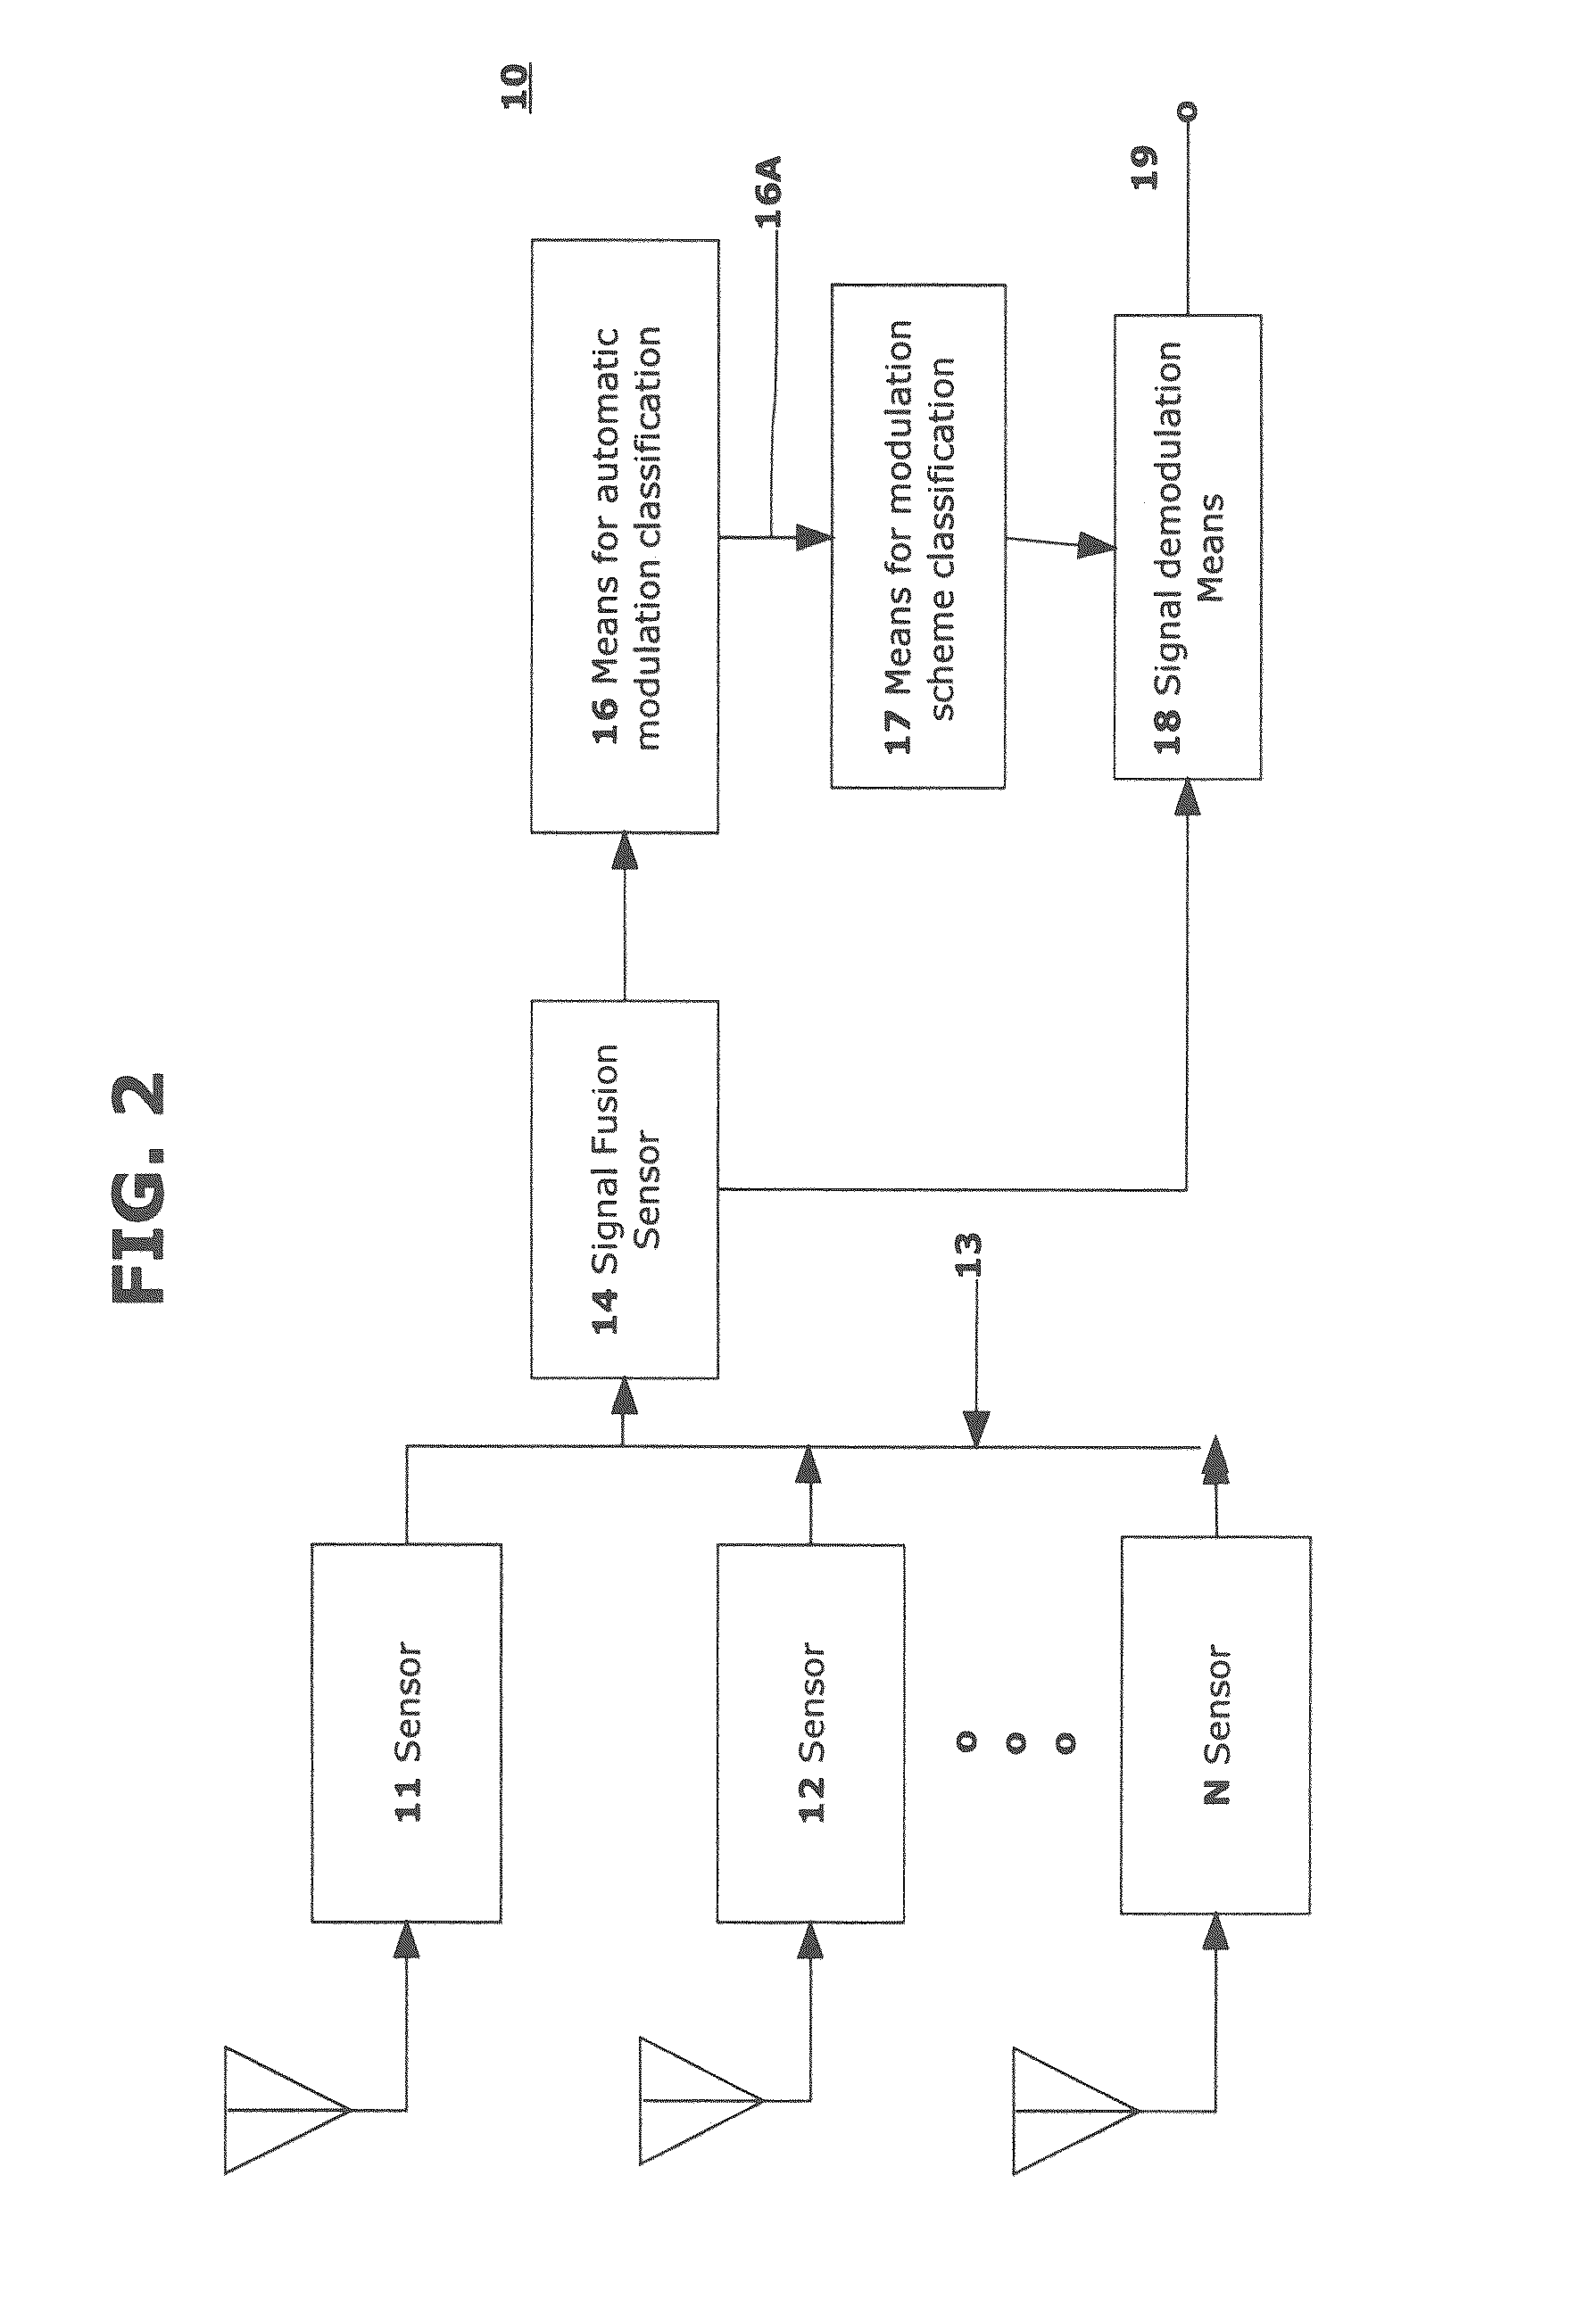 Method of spectrum mapping and exploitation using distributed sensors